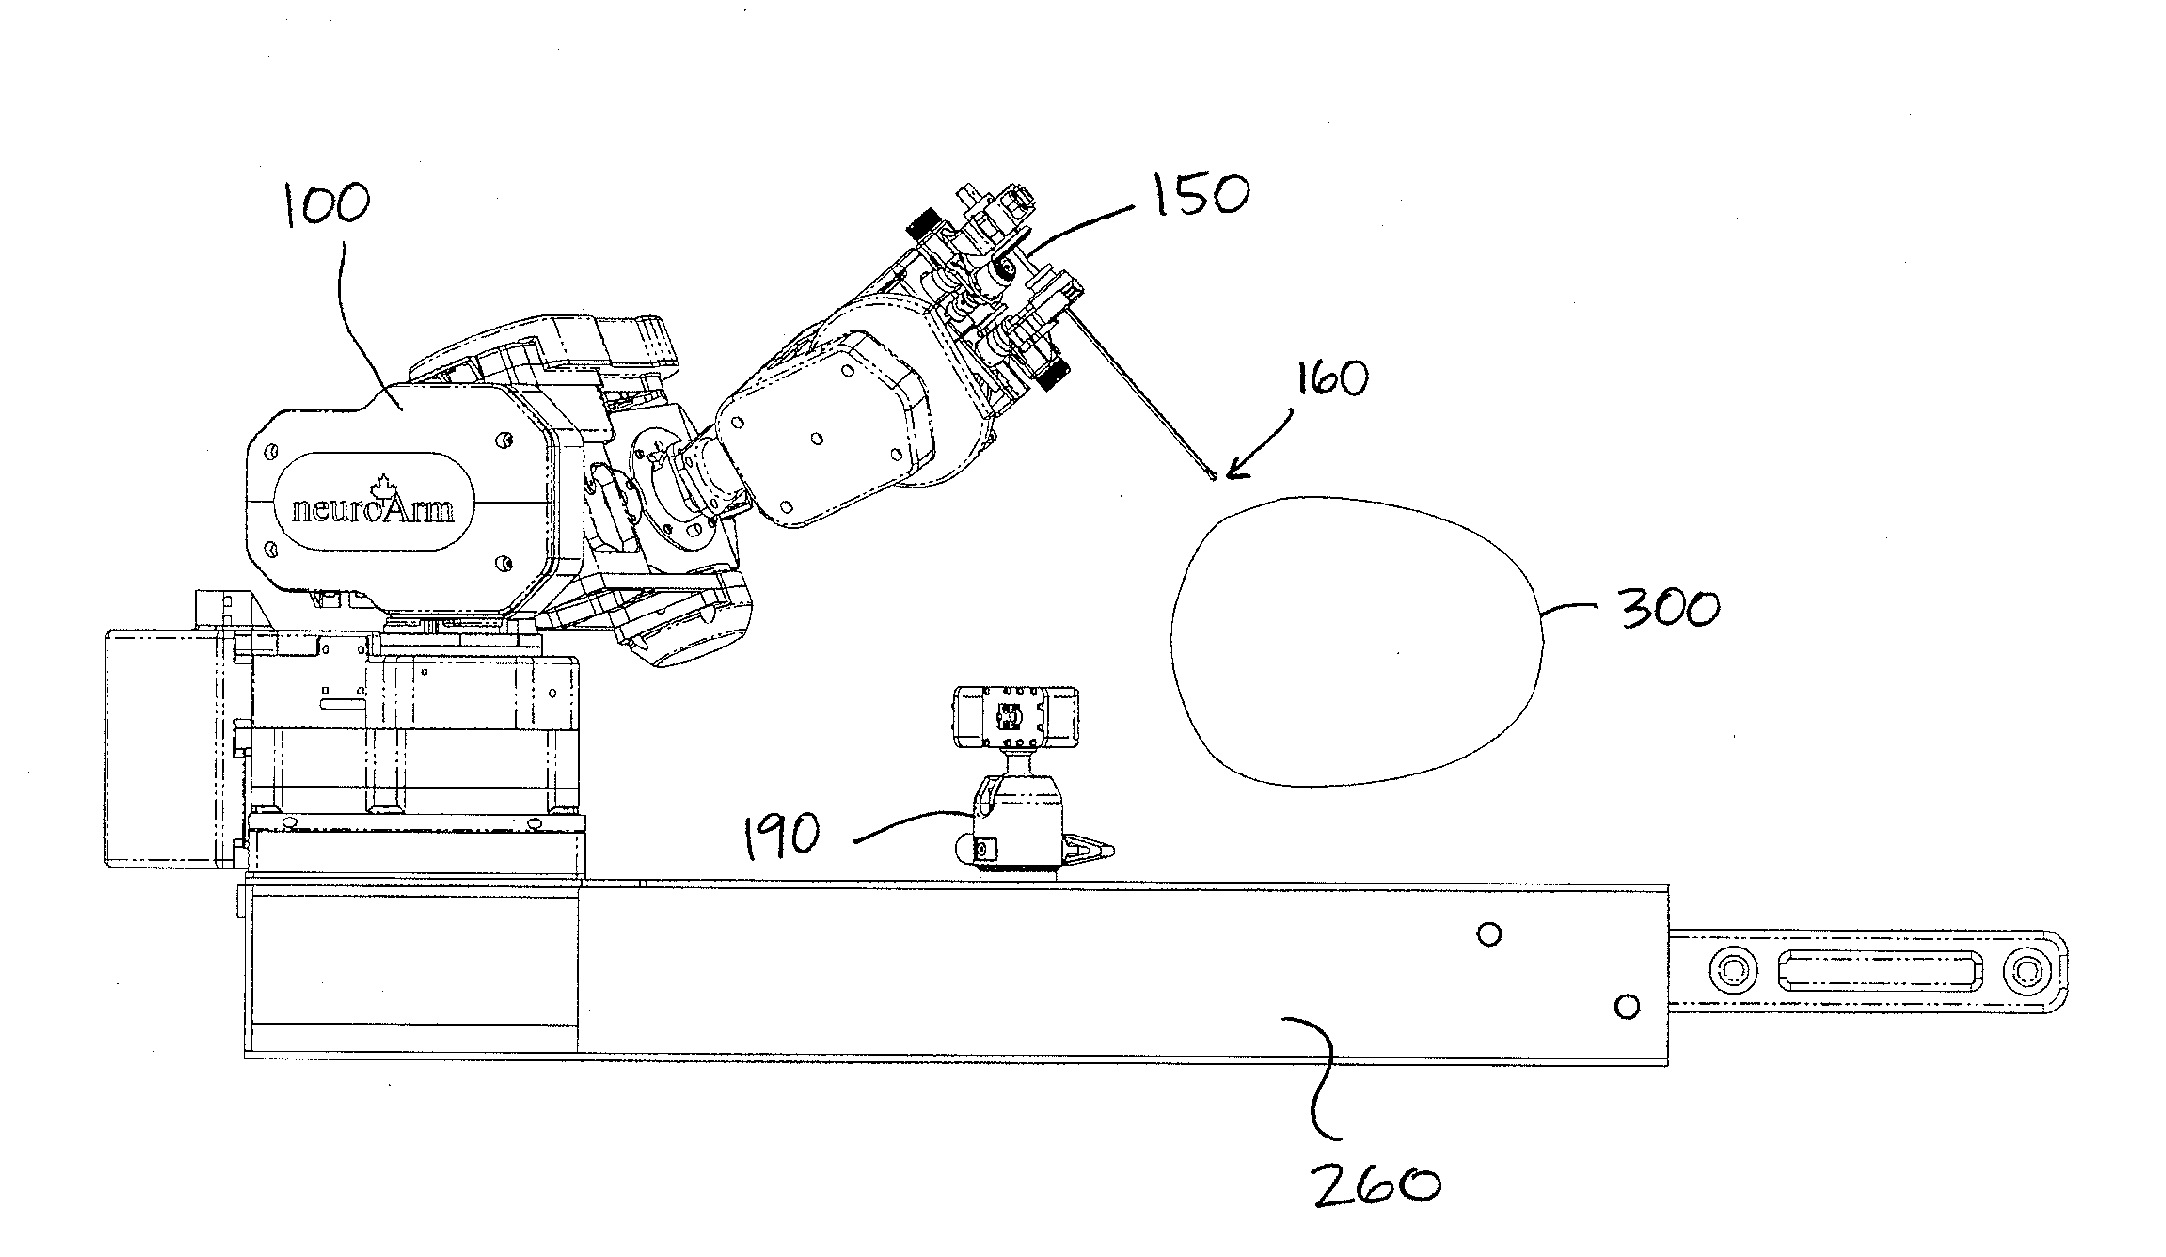 Methods, devices, and systems for non-mechanically restricting and/or programming movement of a tool of a manipulator along a single axis